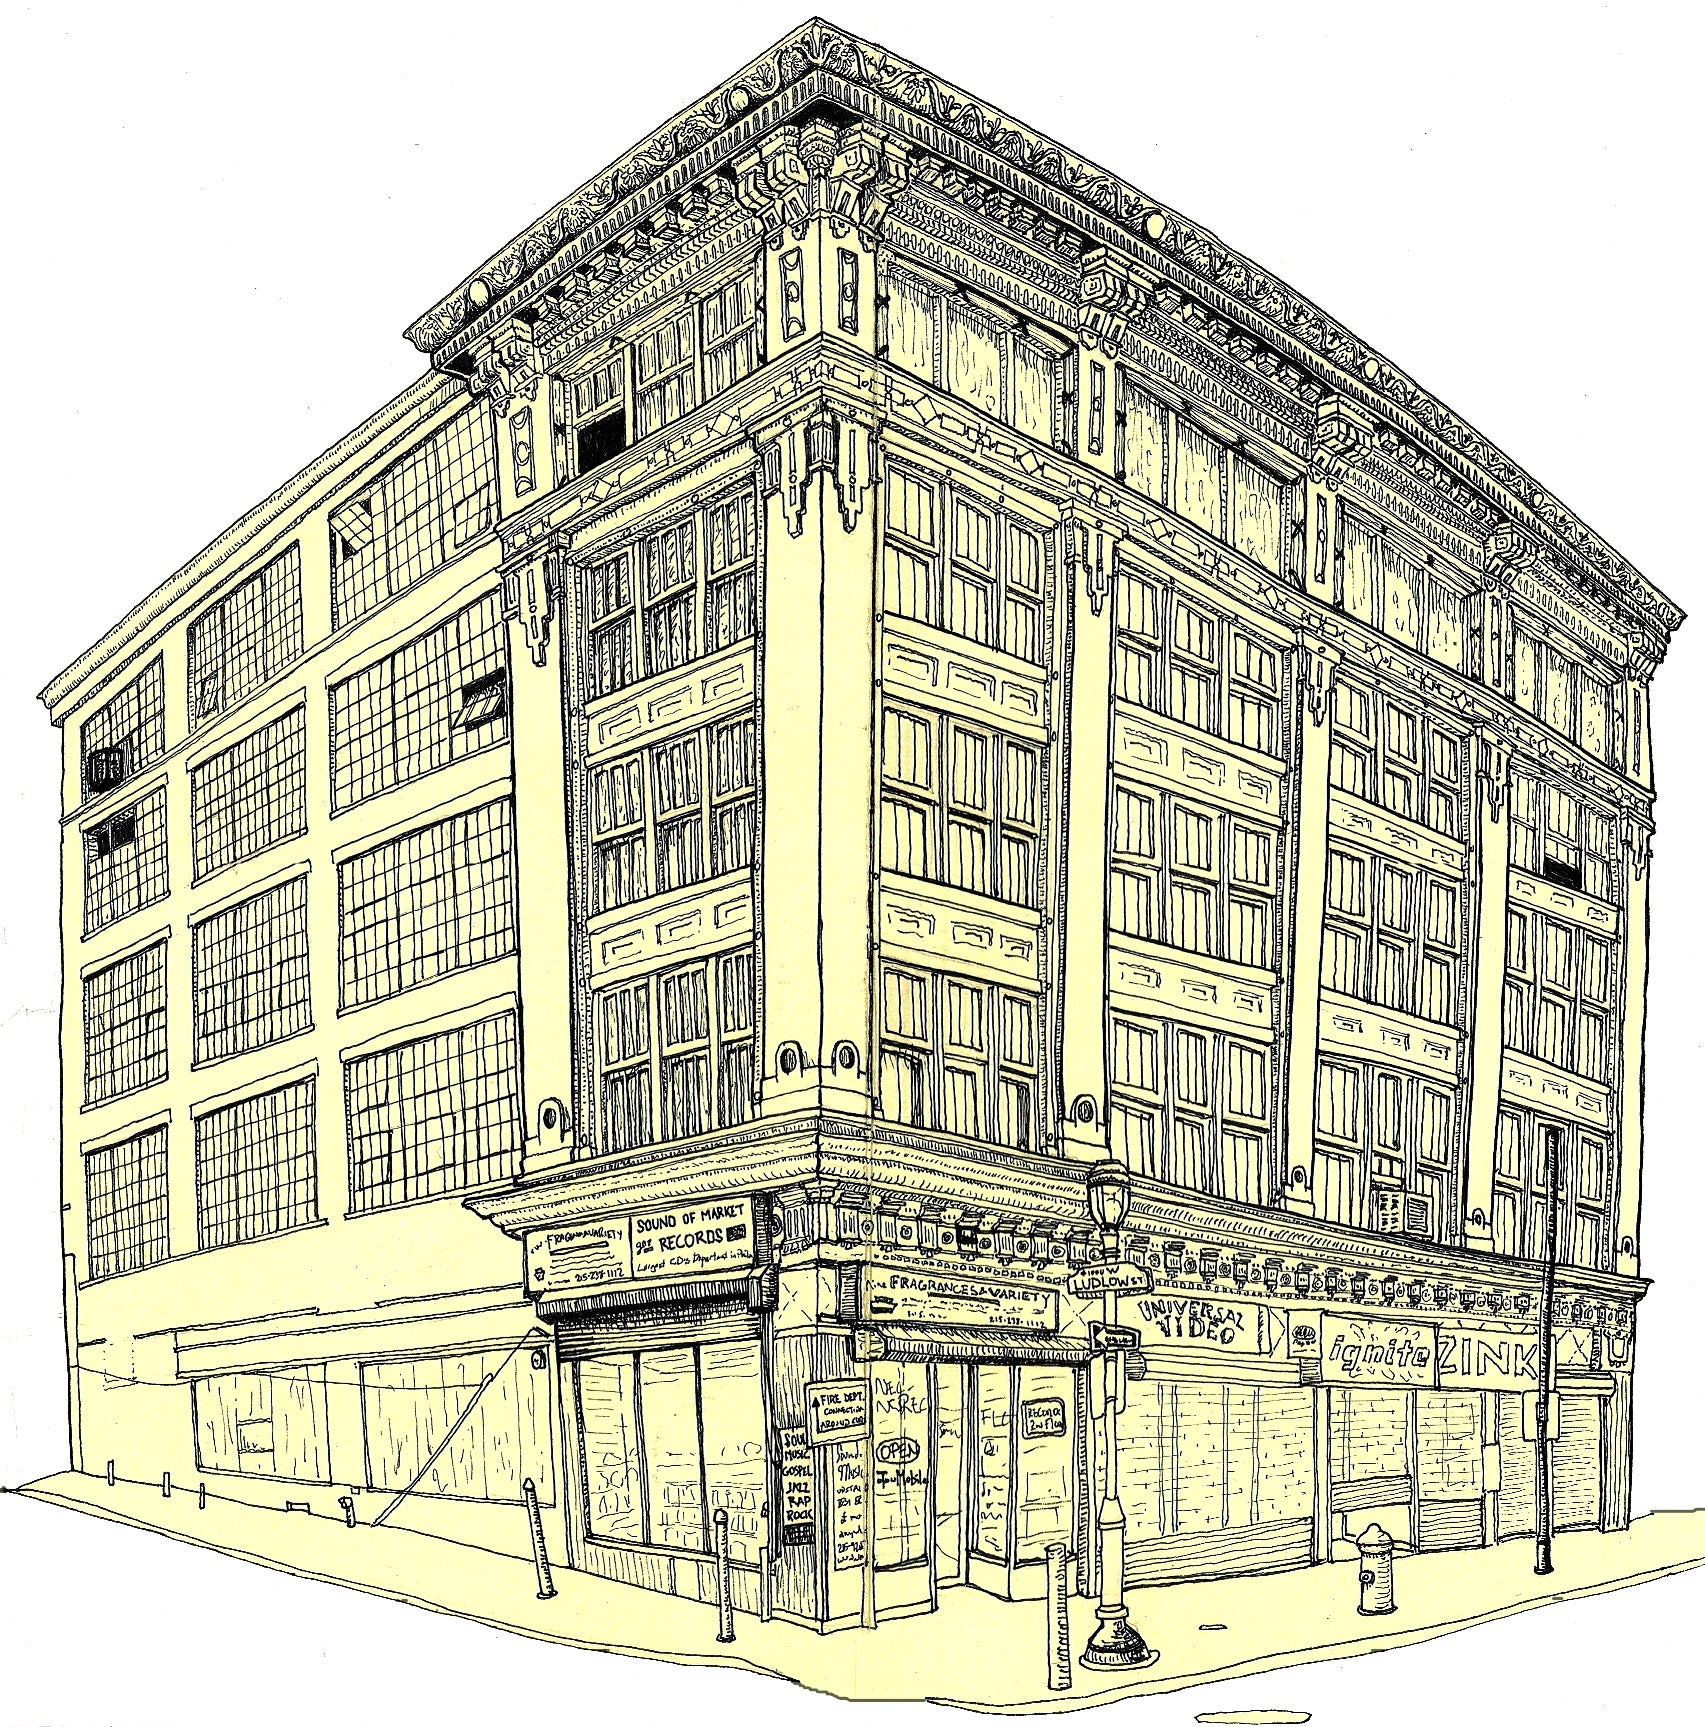 Ben Leech's drawing of an Unlisted building on South 11th Street.